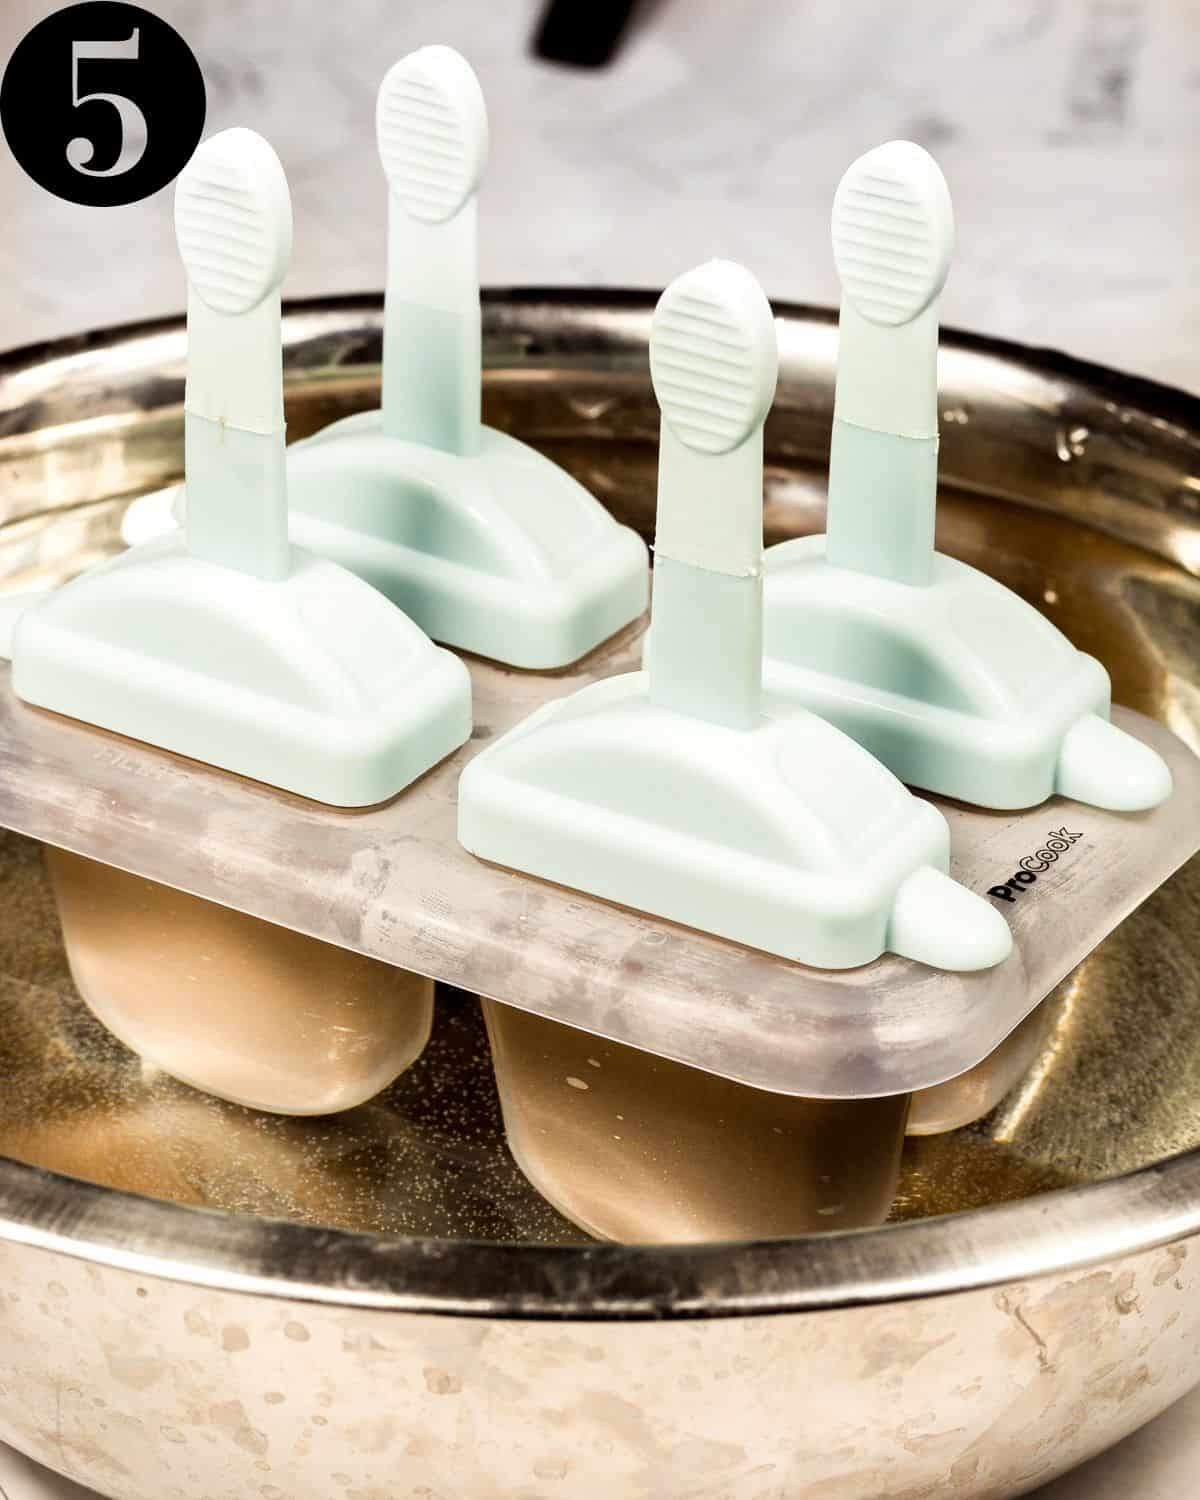 Ice cream moulds in a bowl of warm water.